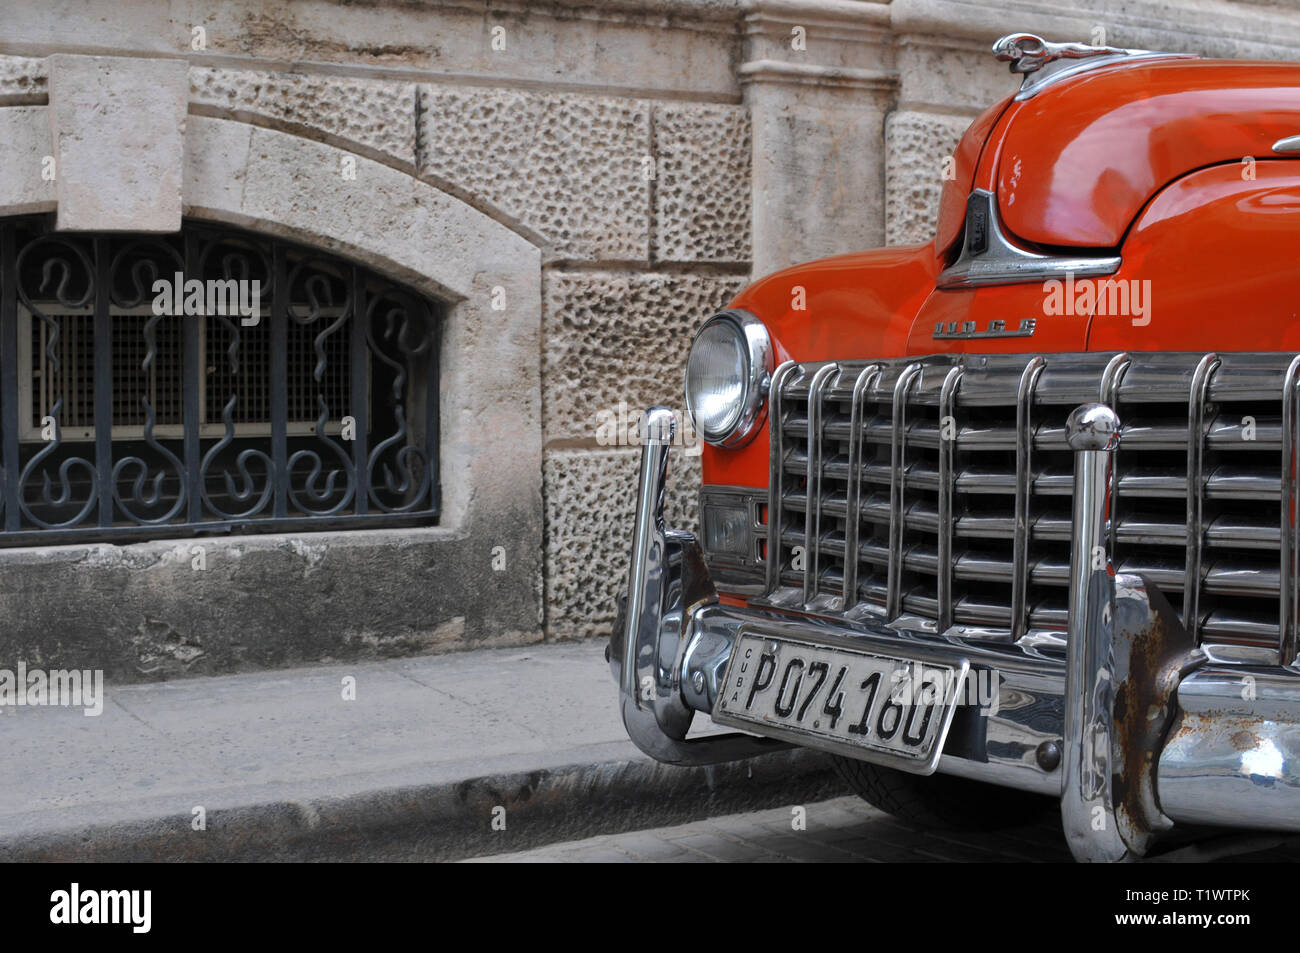 Detail of a classic Dodge automobile parked in Old Havana, Cuba. Vintage American cars are common on the city's streets, and many are used as taxis. Stock Photo